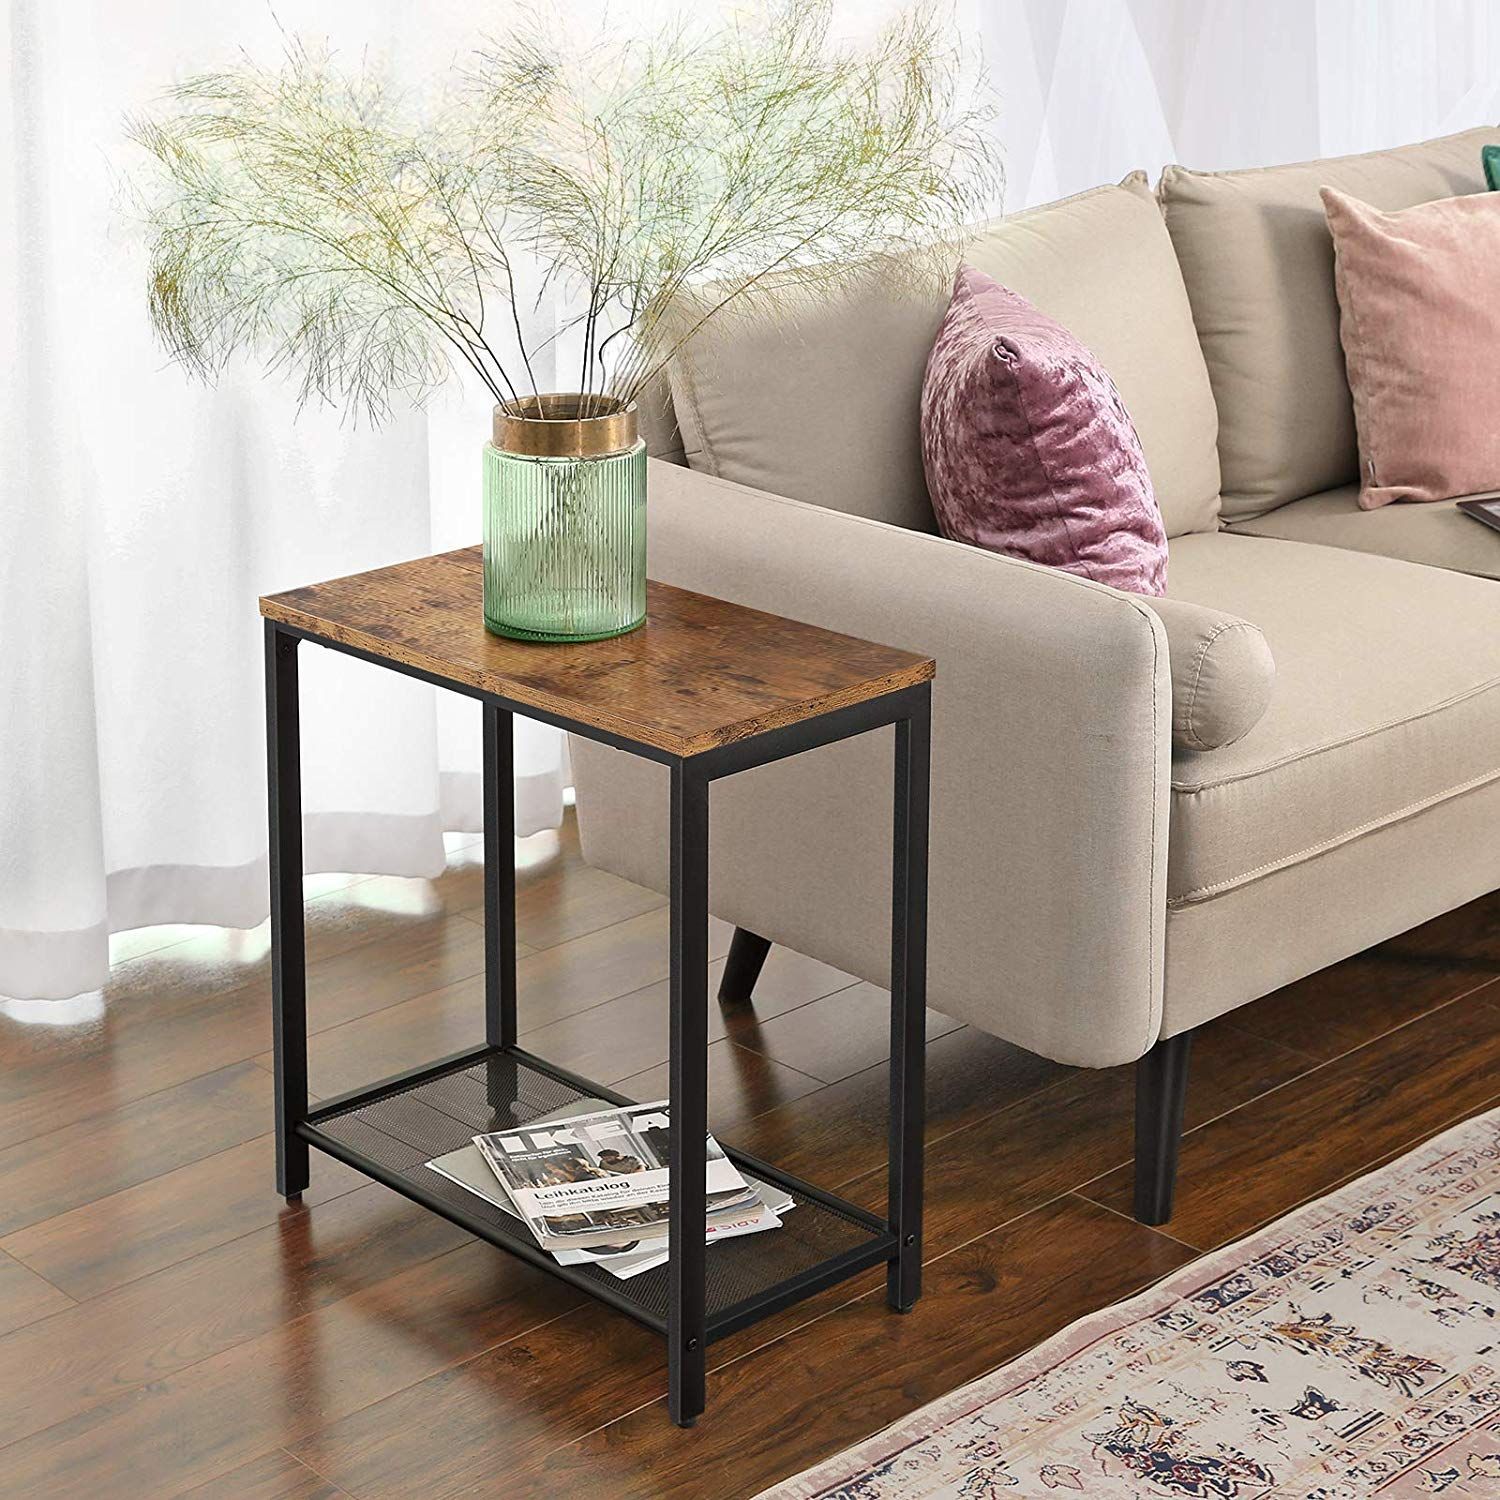 Room And Board Metal Side Tables – Kif Profile Photo Gallery With Metal Side Tables For Living Spaces (Gallery 13 of 20)